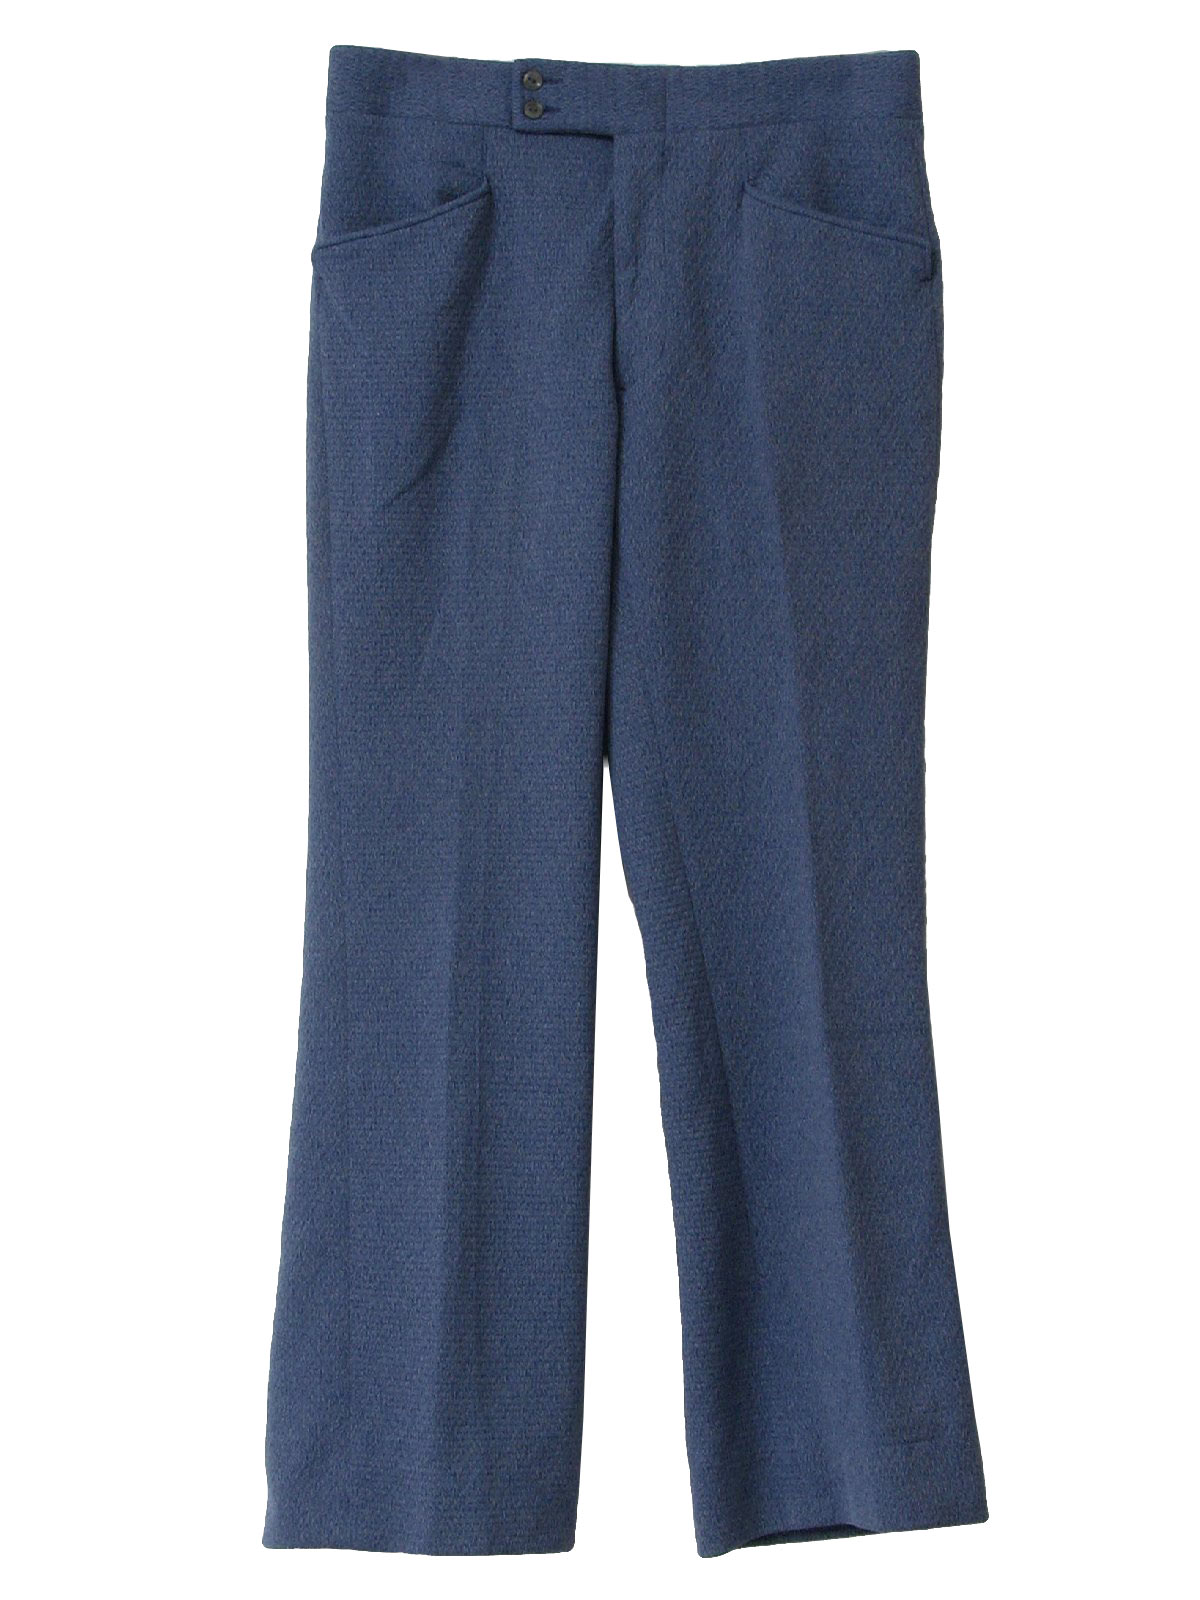 1970's Retro Pants: 70s -Care Label Only- Mens heathered blue, flared ...